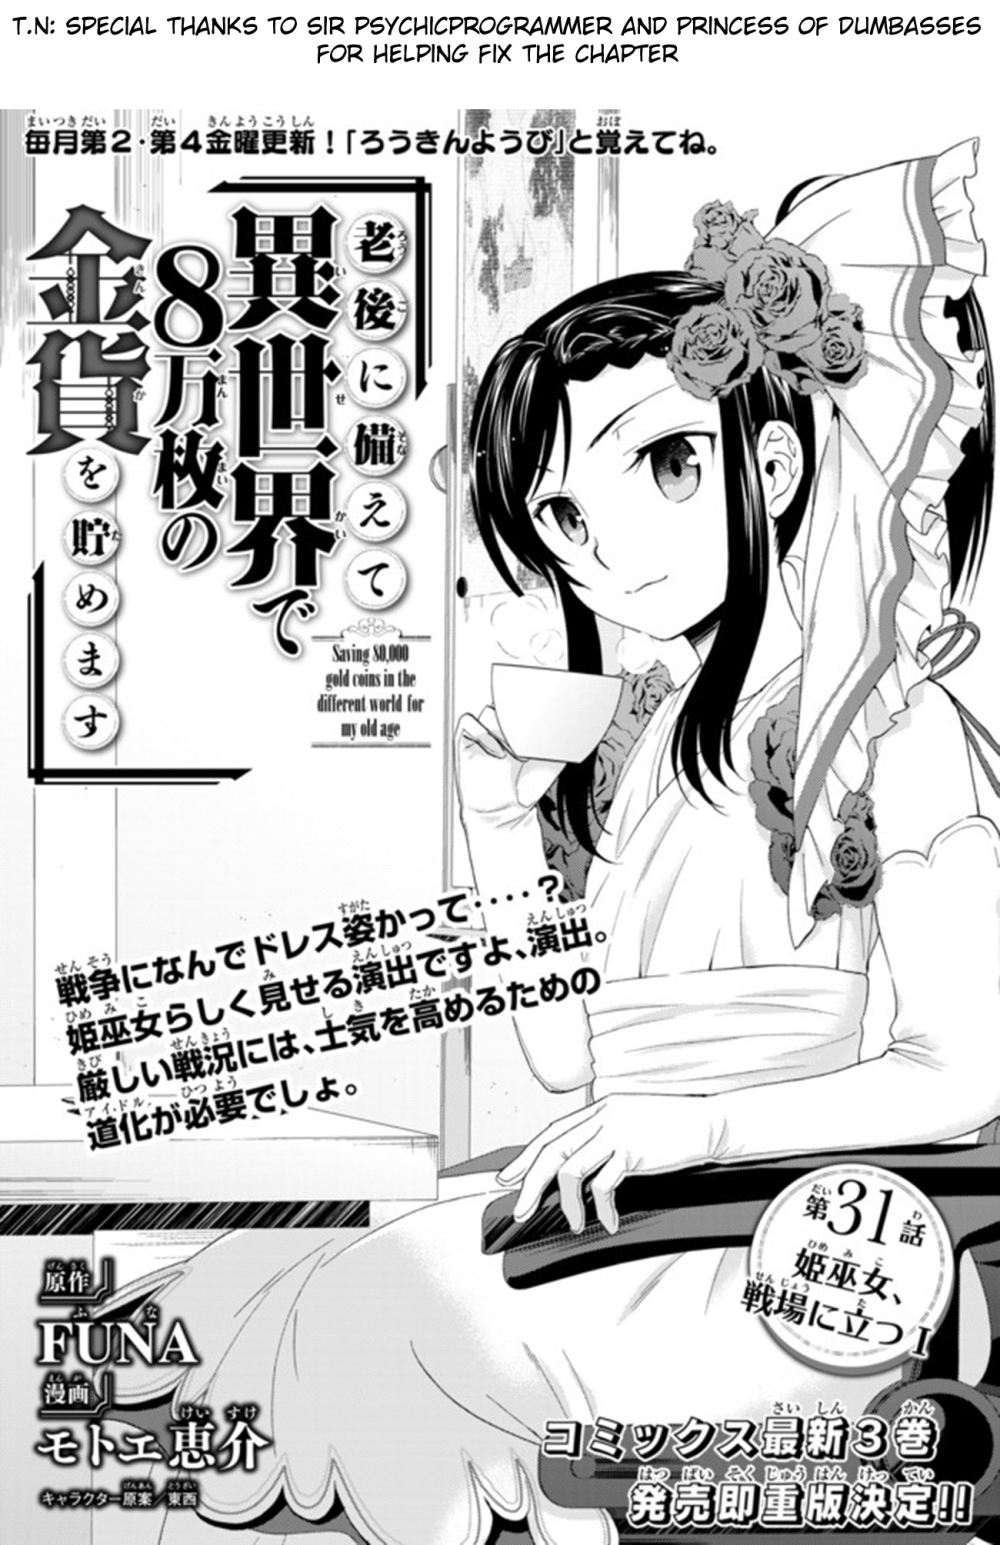 Saving 80,000 Gold Coins in the Different World for My Old Age Ch. 31.1 Shrine Princess, To The Battlefield (Part 1)